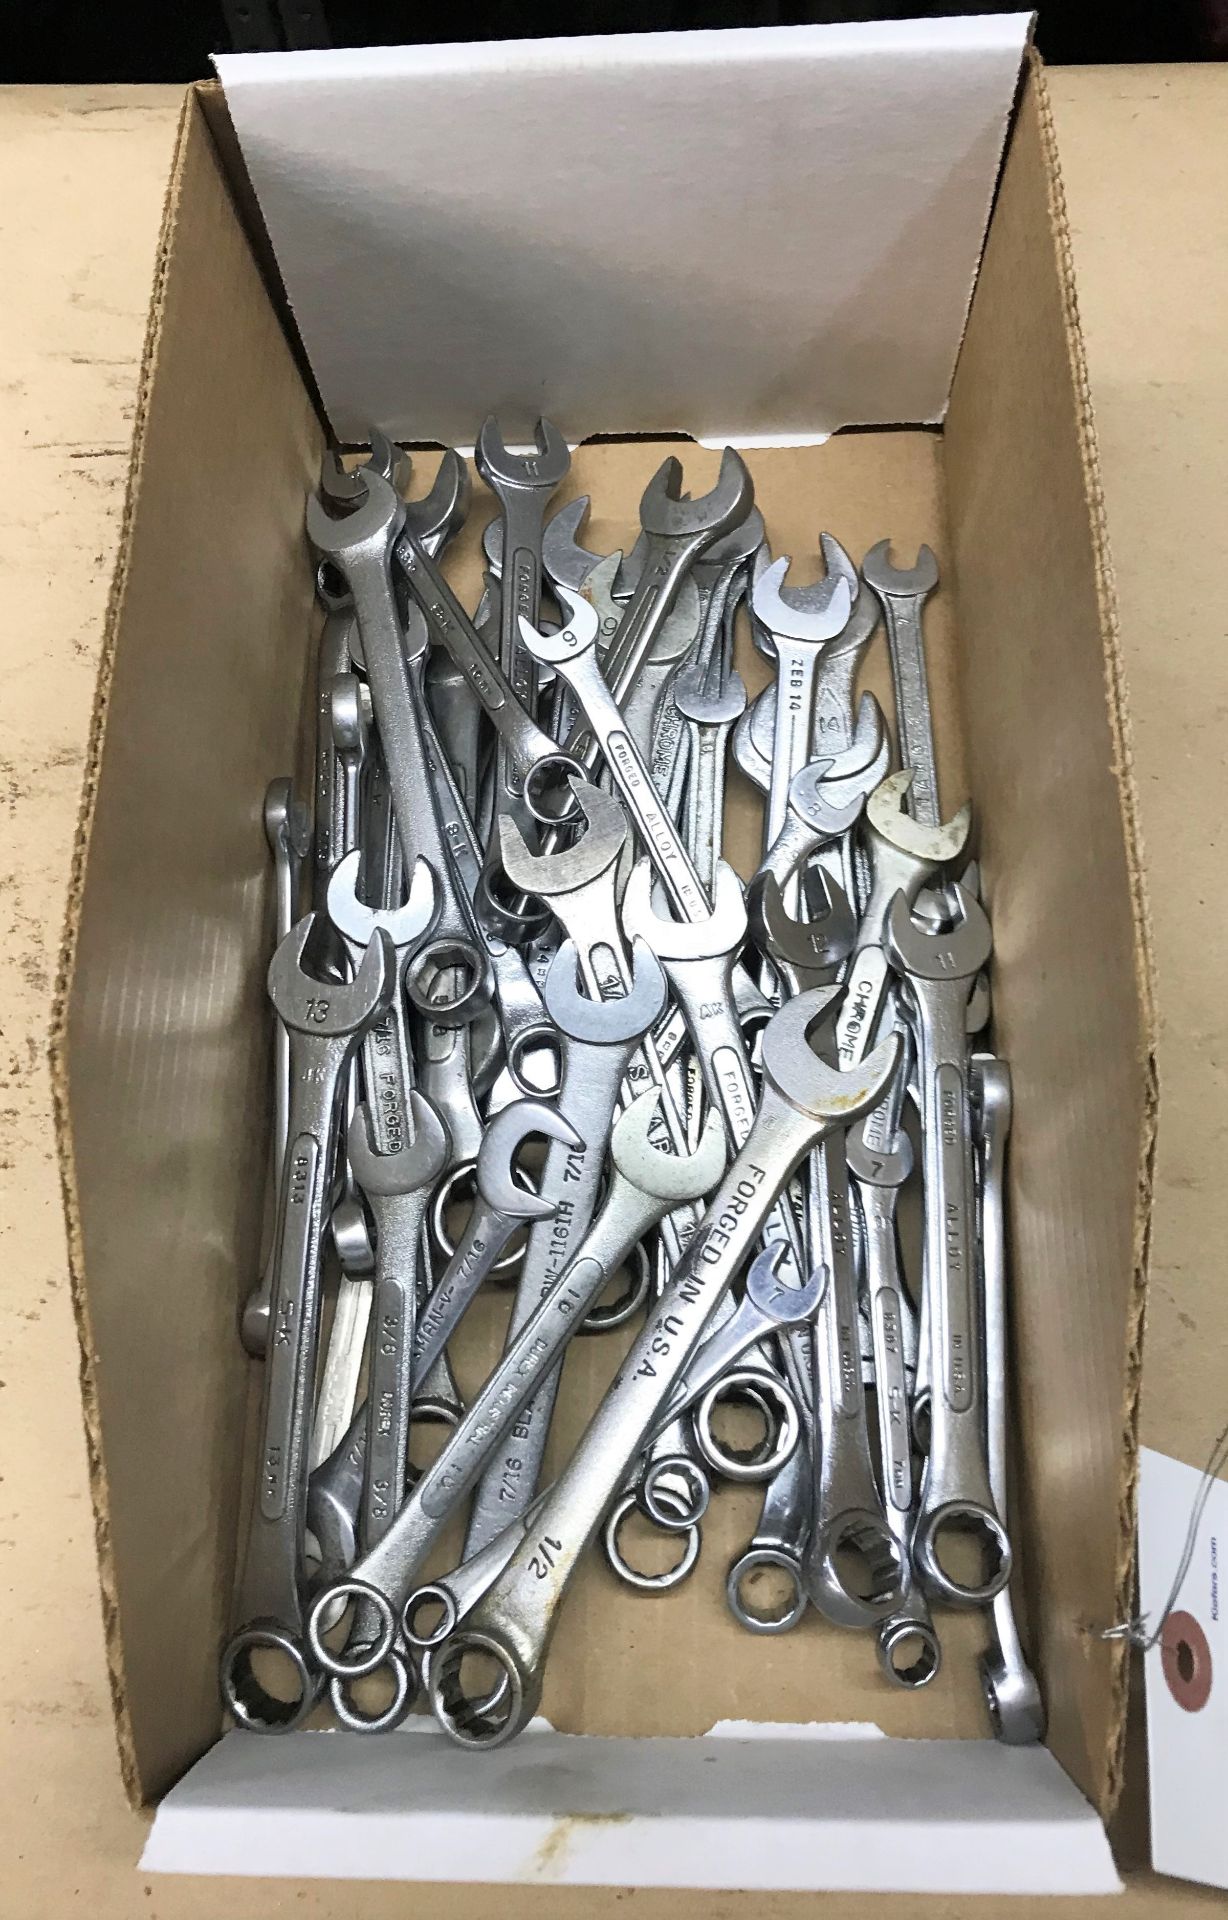 47 Assorted Wrenches